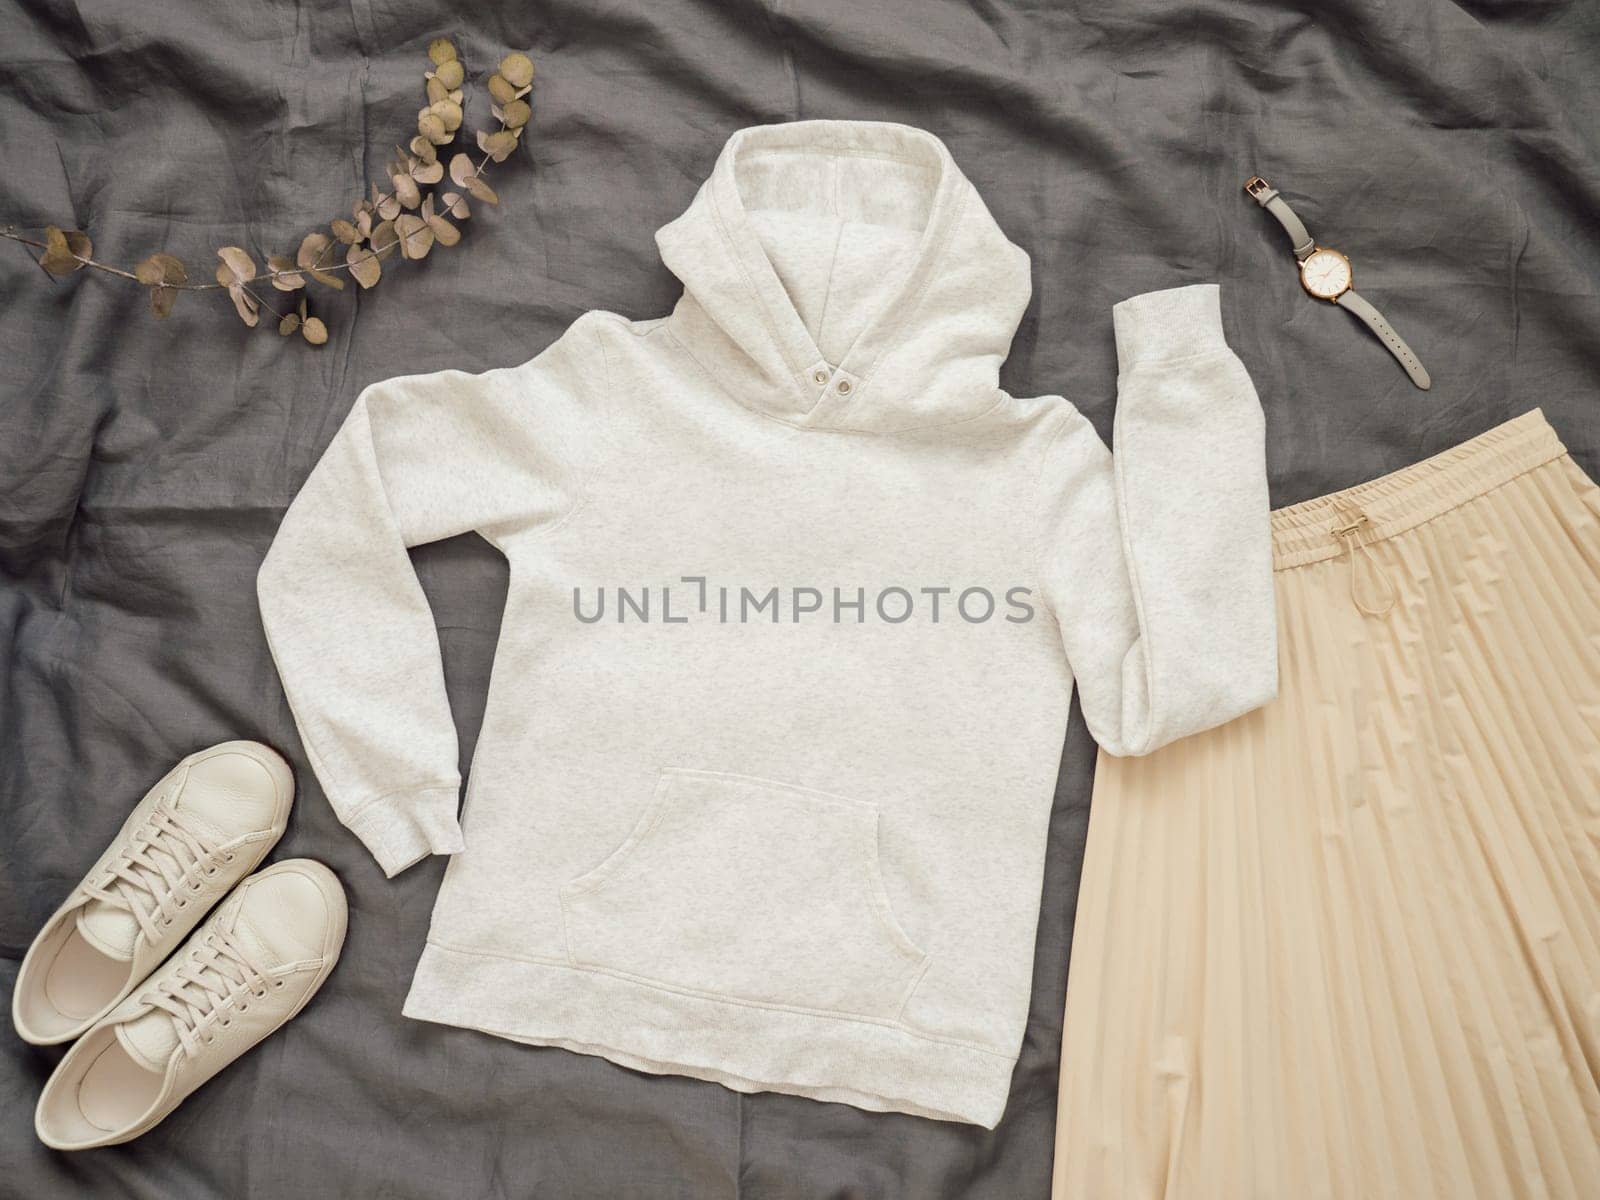 Fashionable female look with white empty hoody, cream pleated skirt and white sneakers. Top view of white blank hoody with long sleeves over gray bed linen. Mock up for hoody print design.